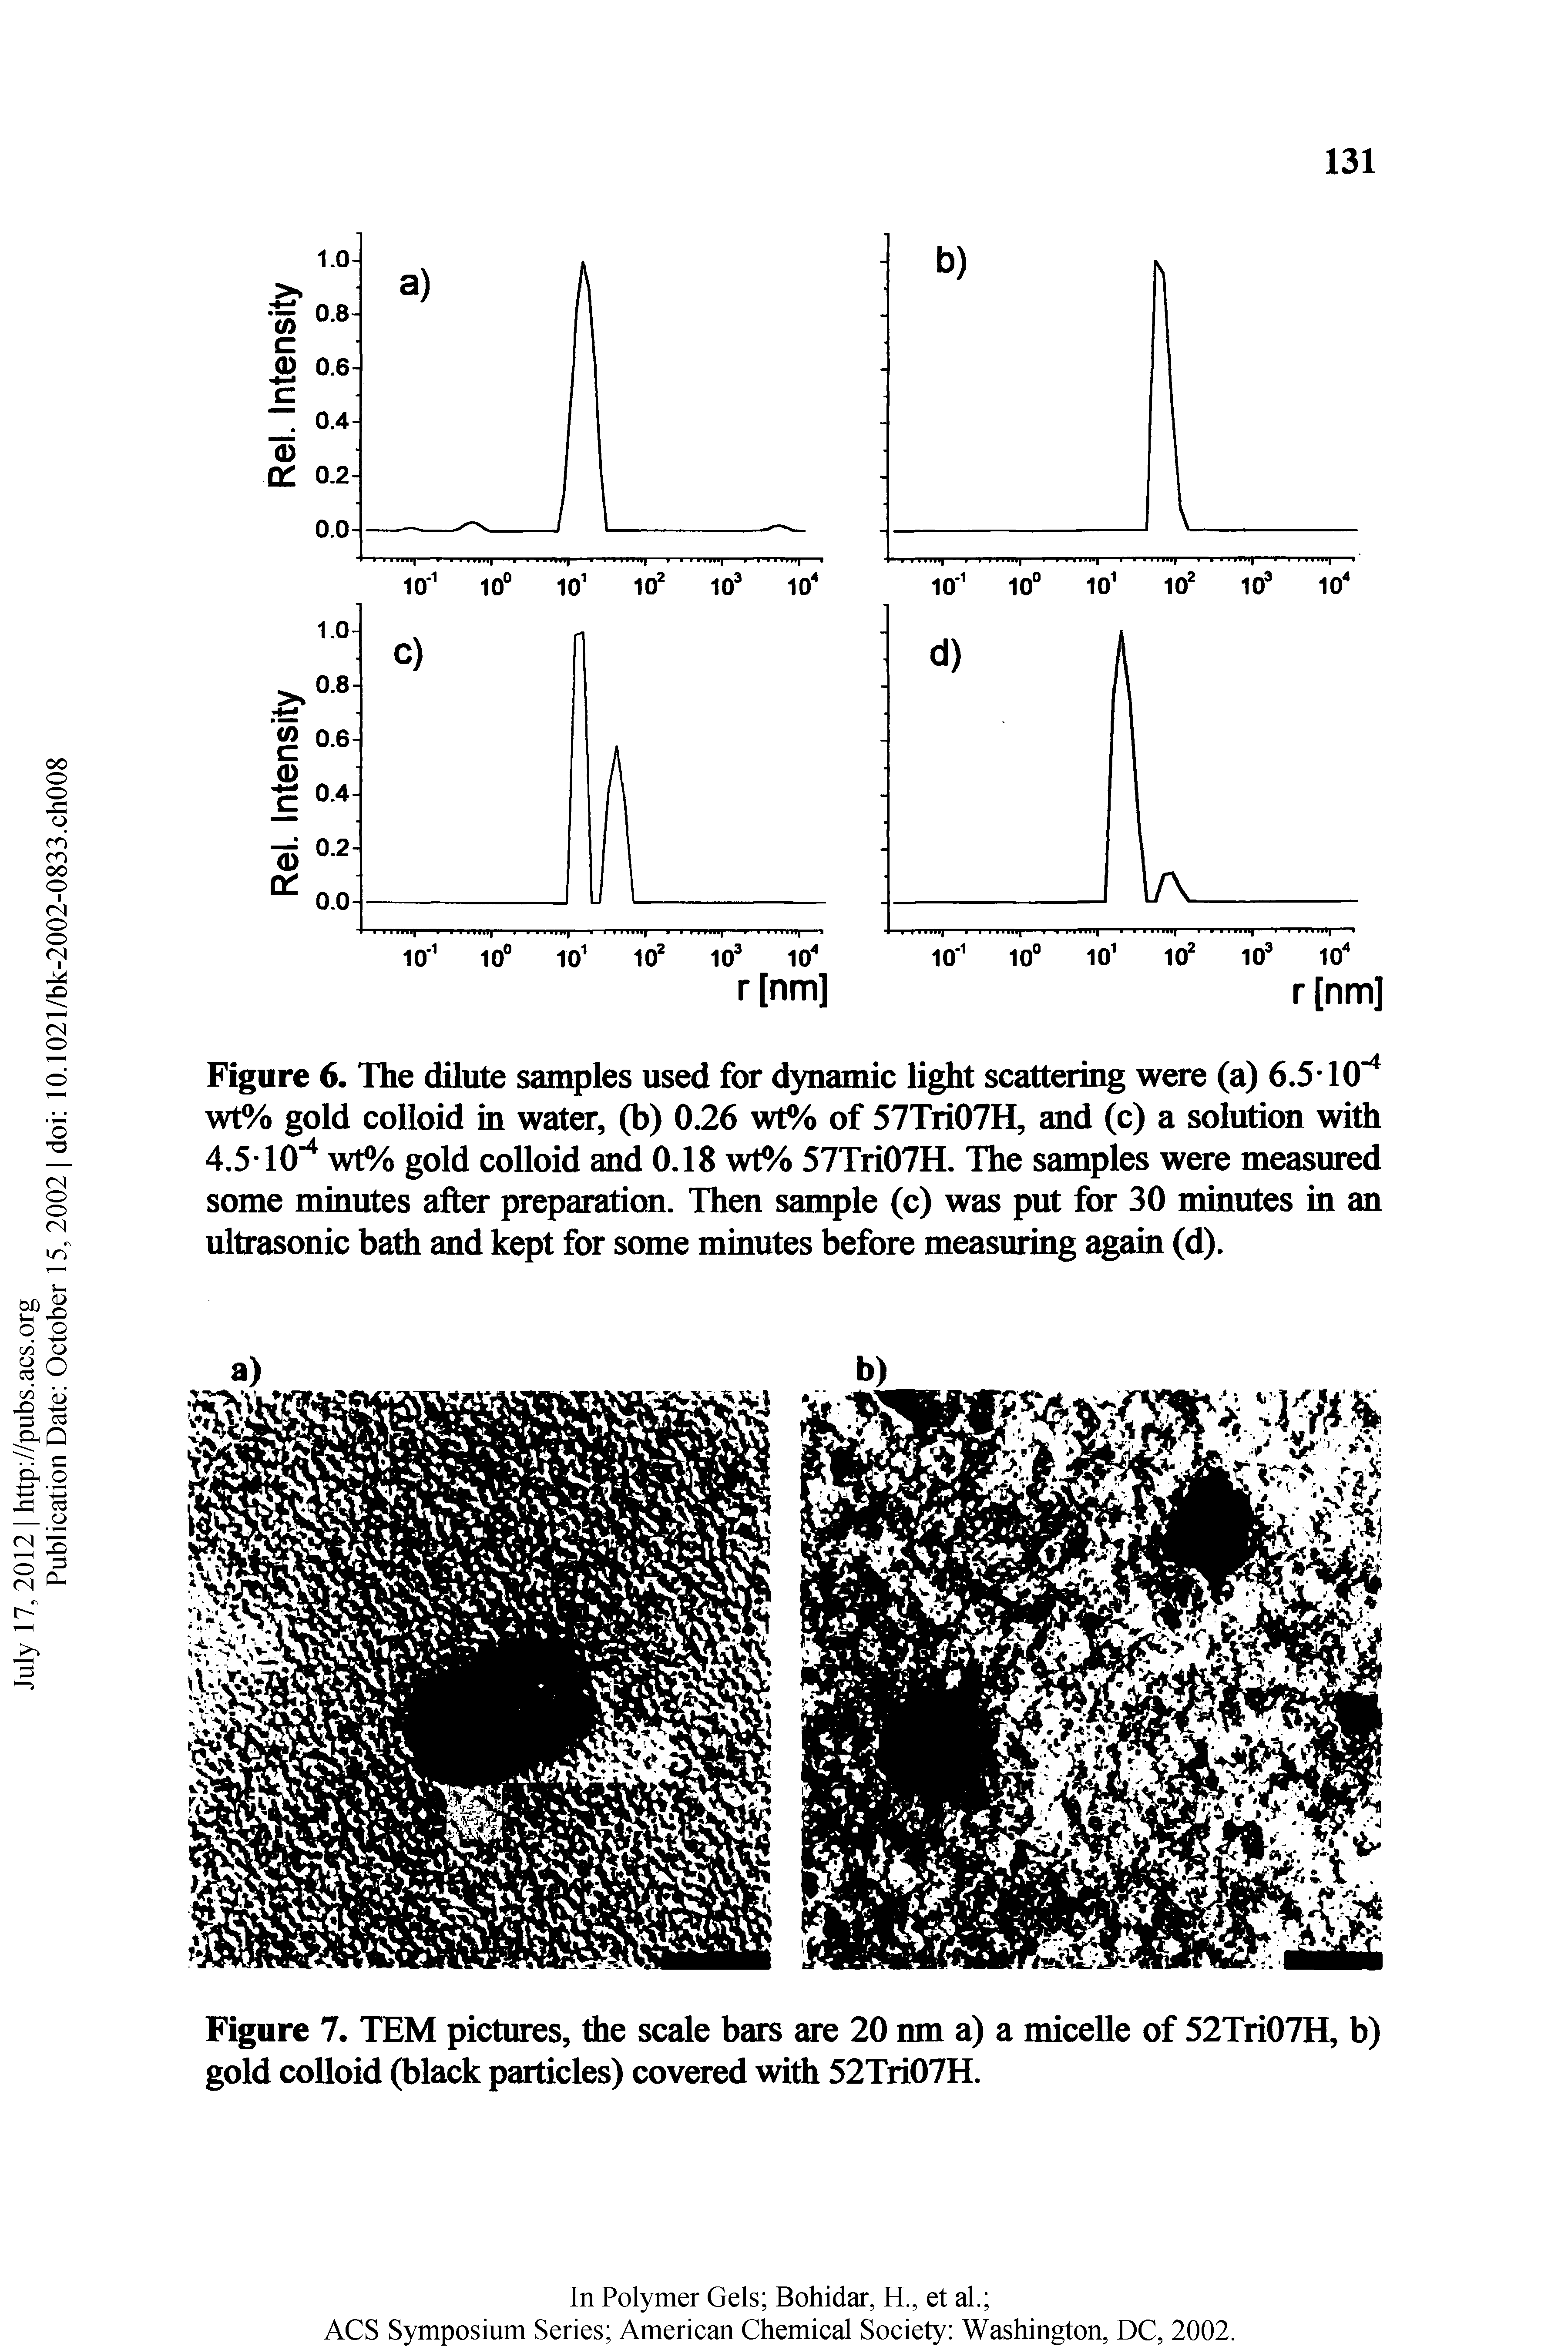 Figure 7. TEM pictures, the scale bars are 20 mn a) a micelle of 52Tri07H, b) gold colloid (black particles) covered wiA 52Tri07H.